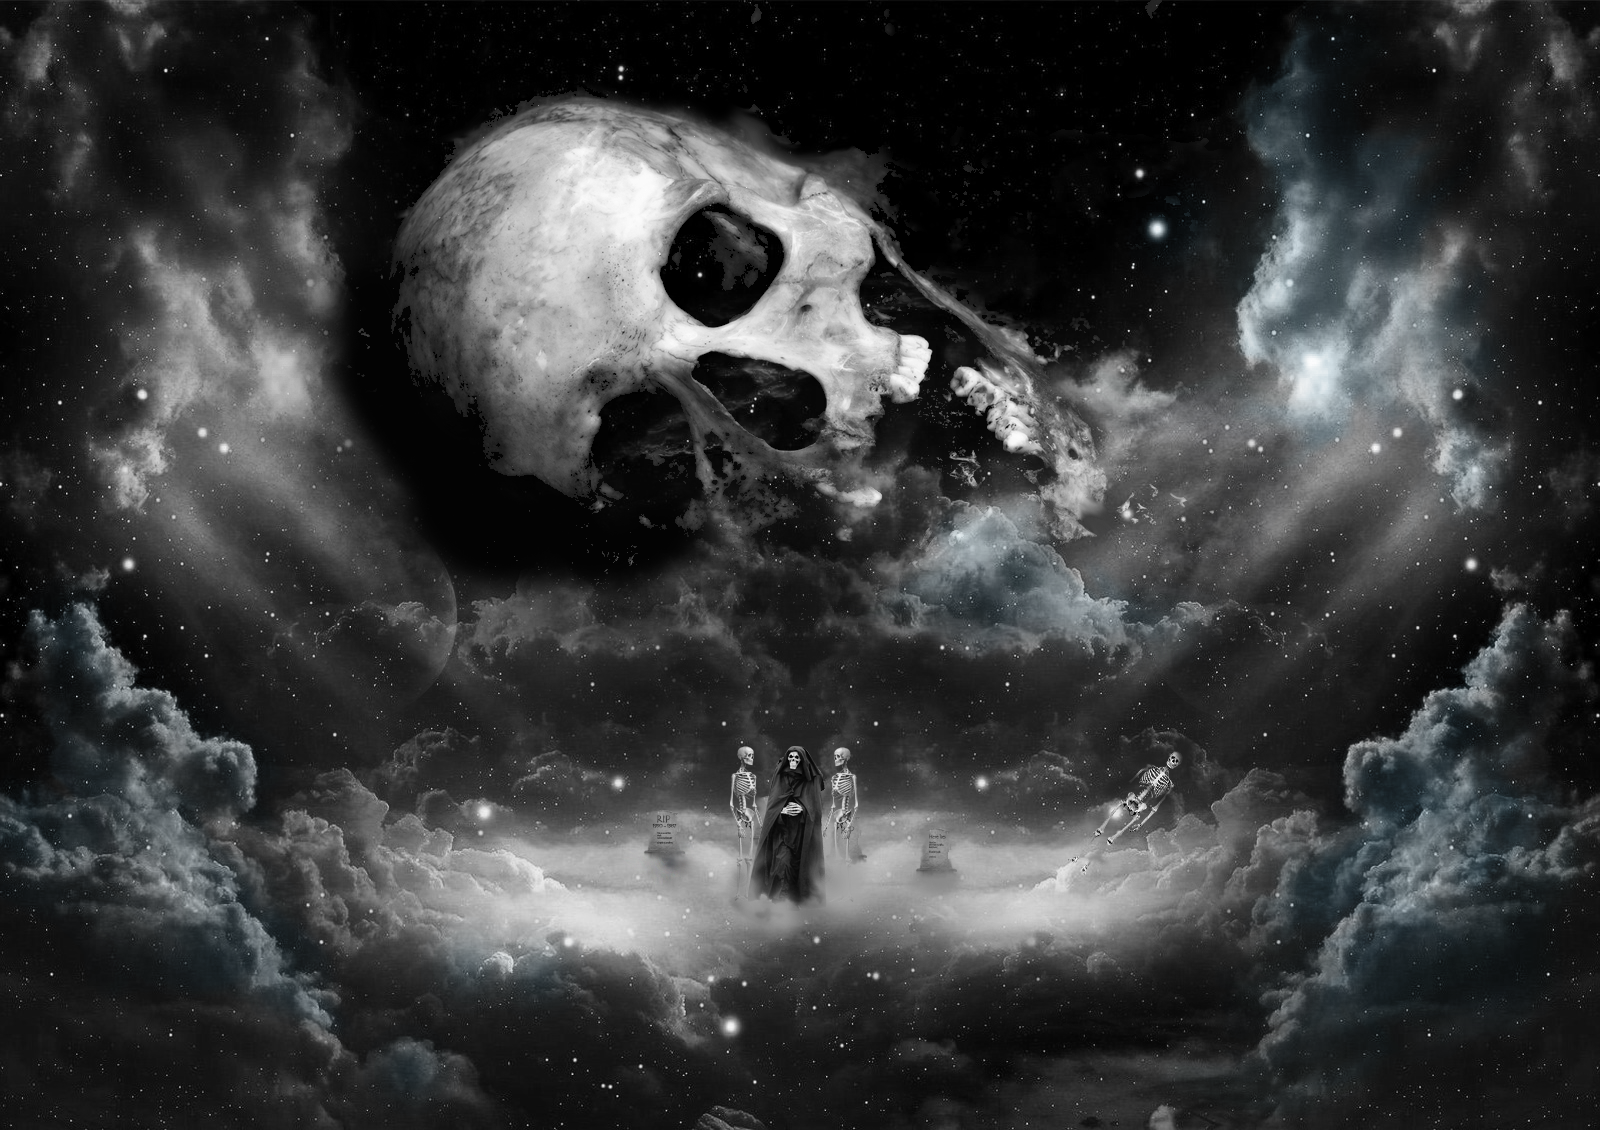 the_home_of_death_by_gavzxhayley-d4p0wgn.png